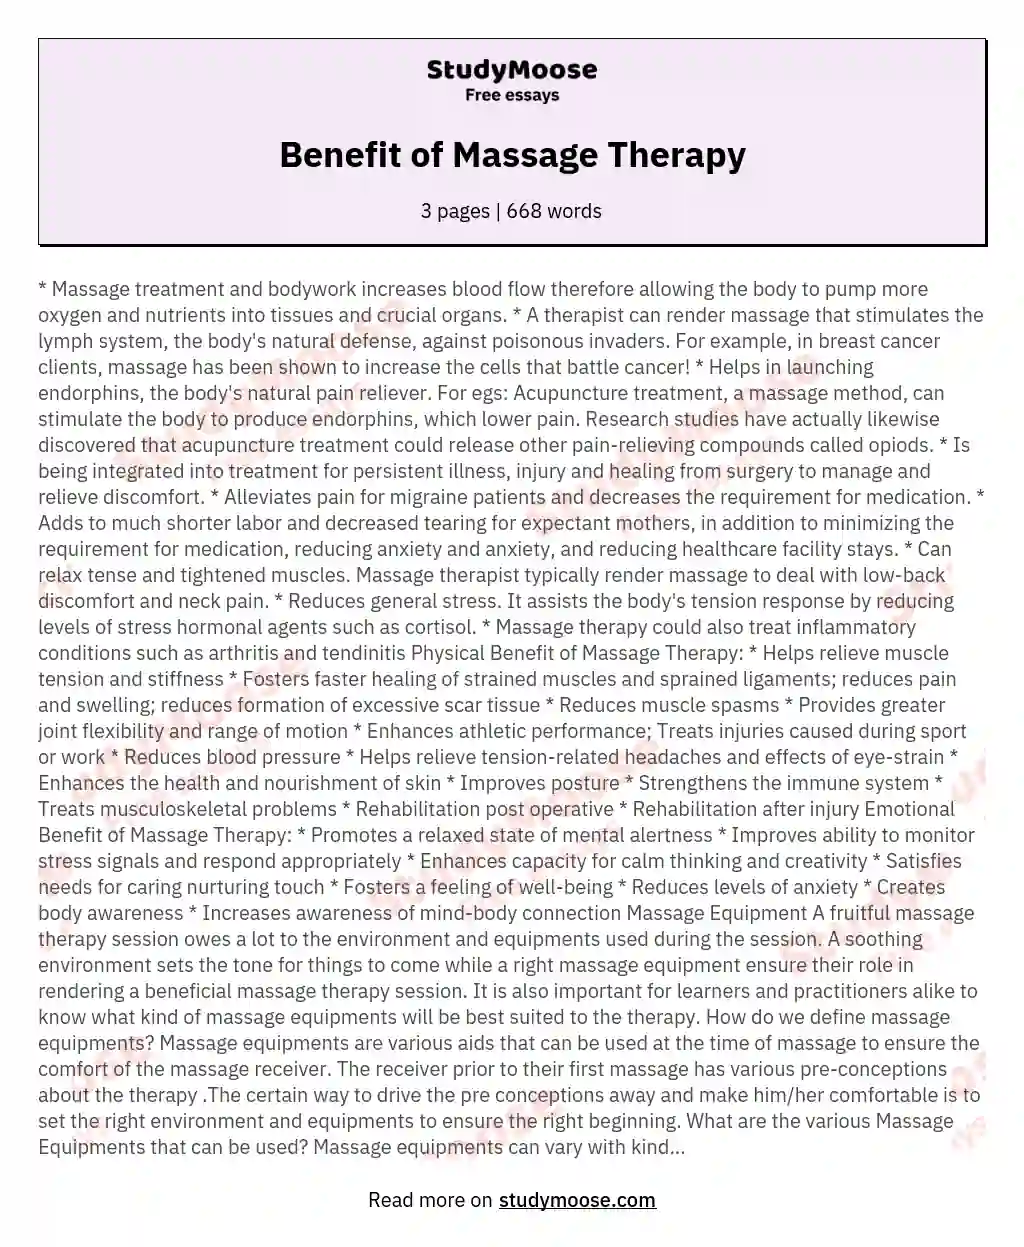 Benefit of Massage Therapy essay